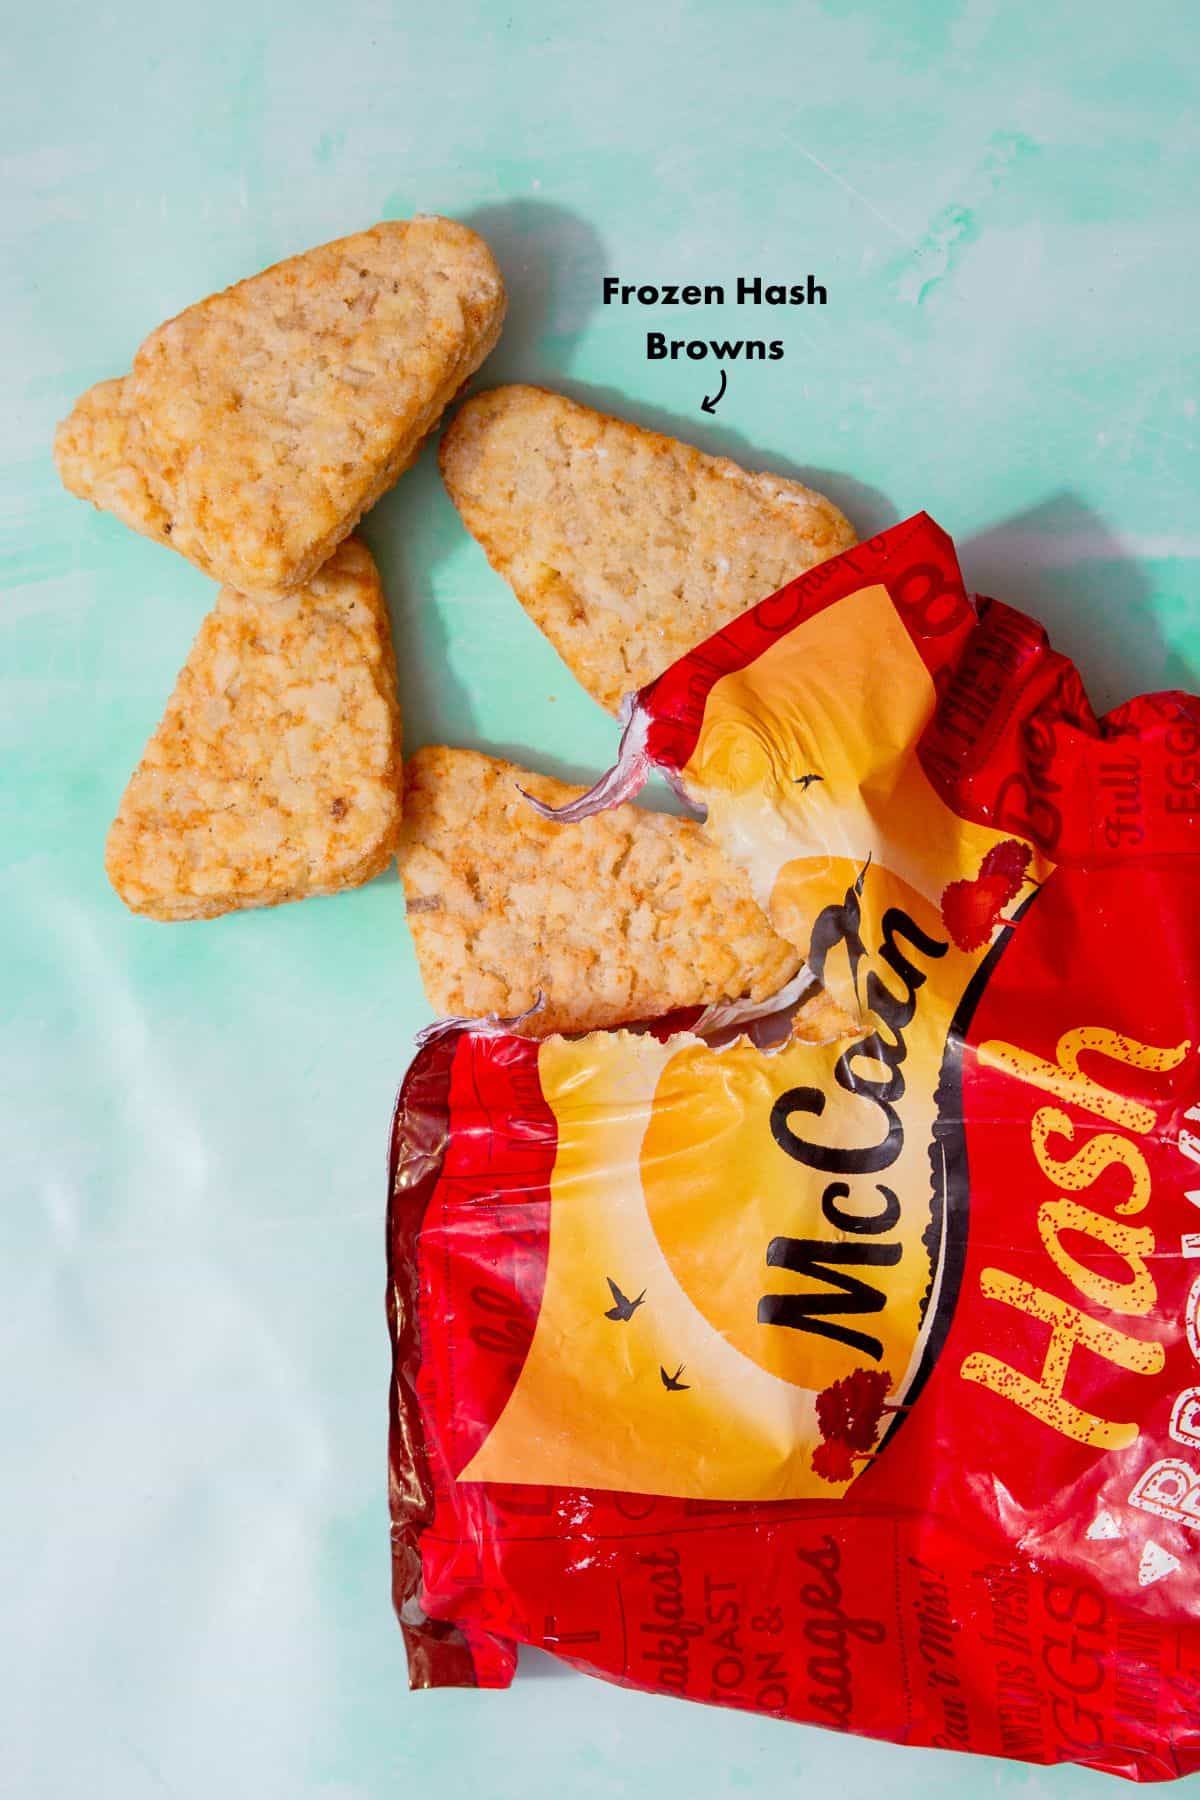 A few hash browns fallen out of the plastic labelled packaging from McCains.